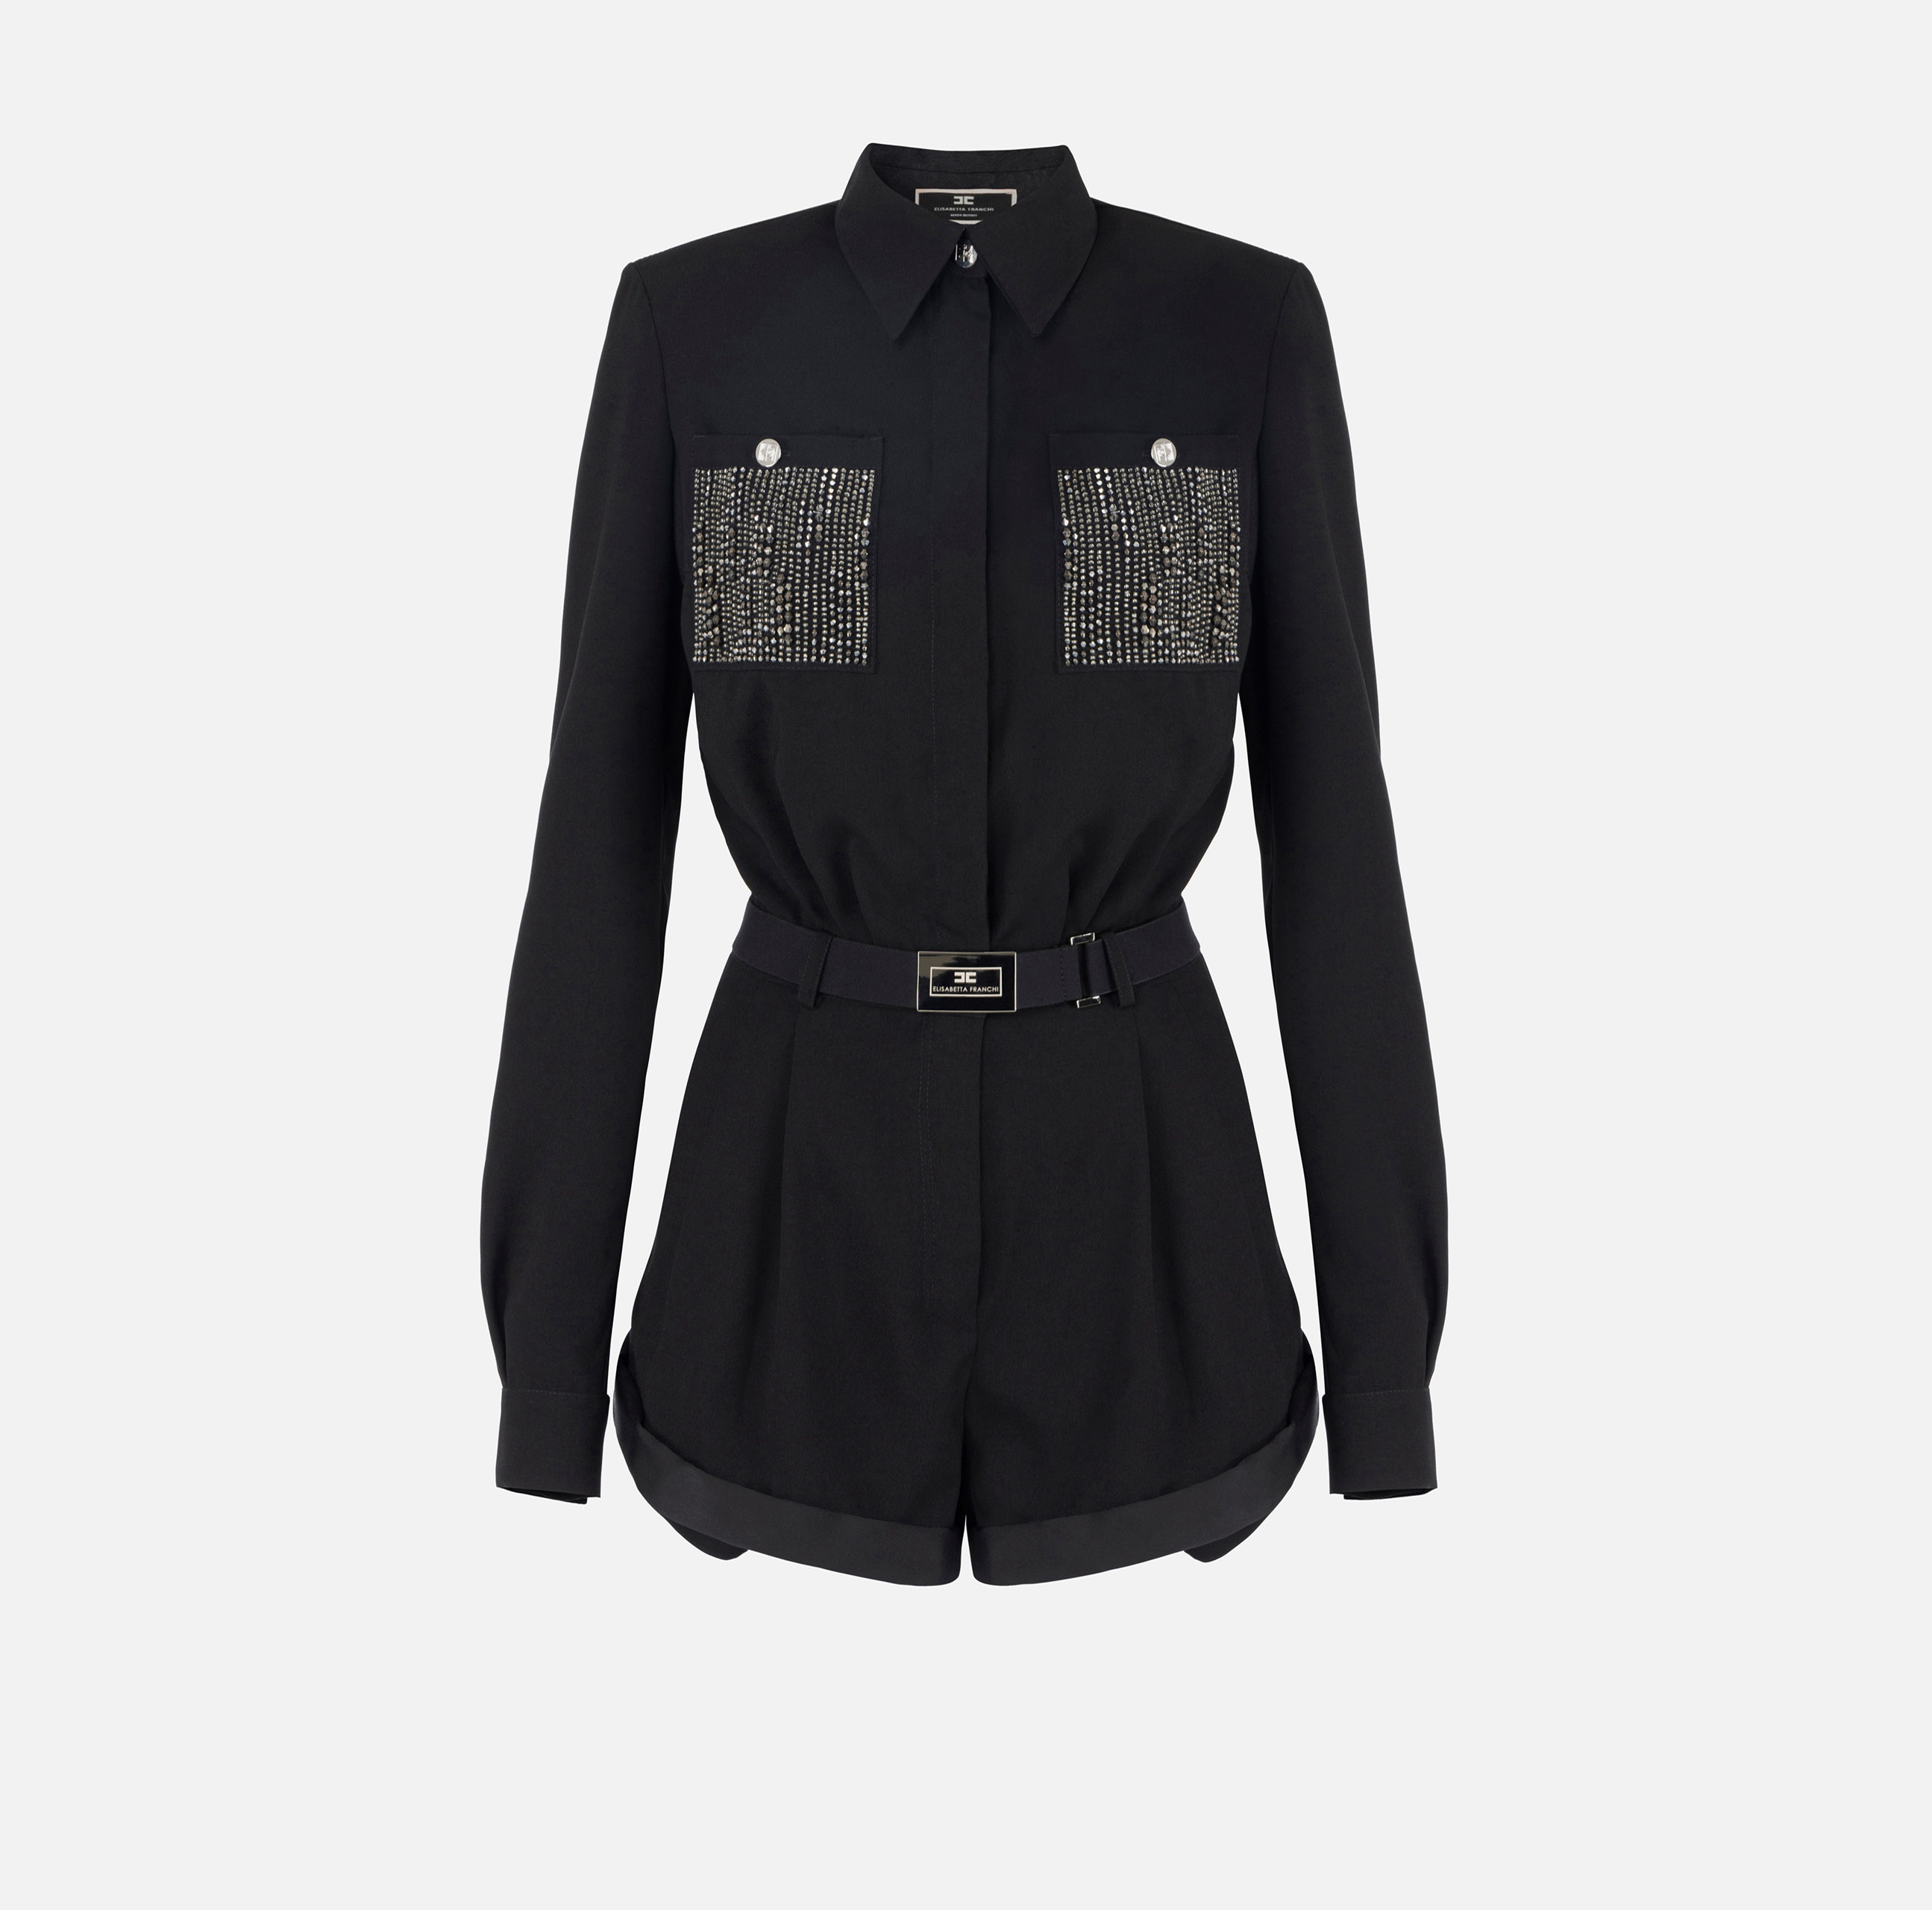 Romper suit in crêpe fabric with embroidery - Elisabetta Franchi